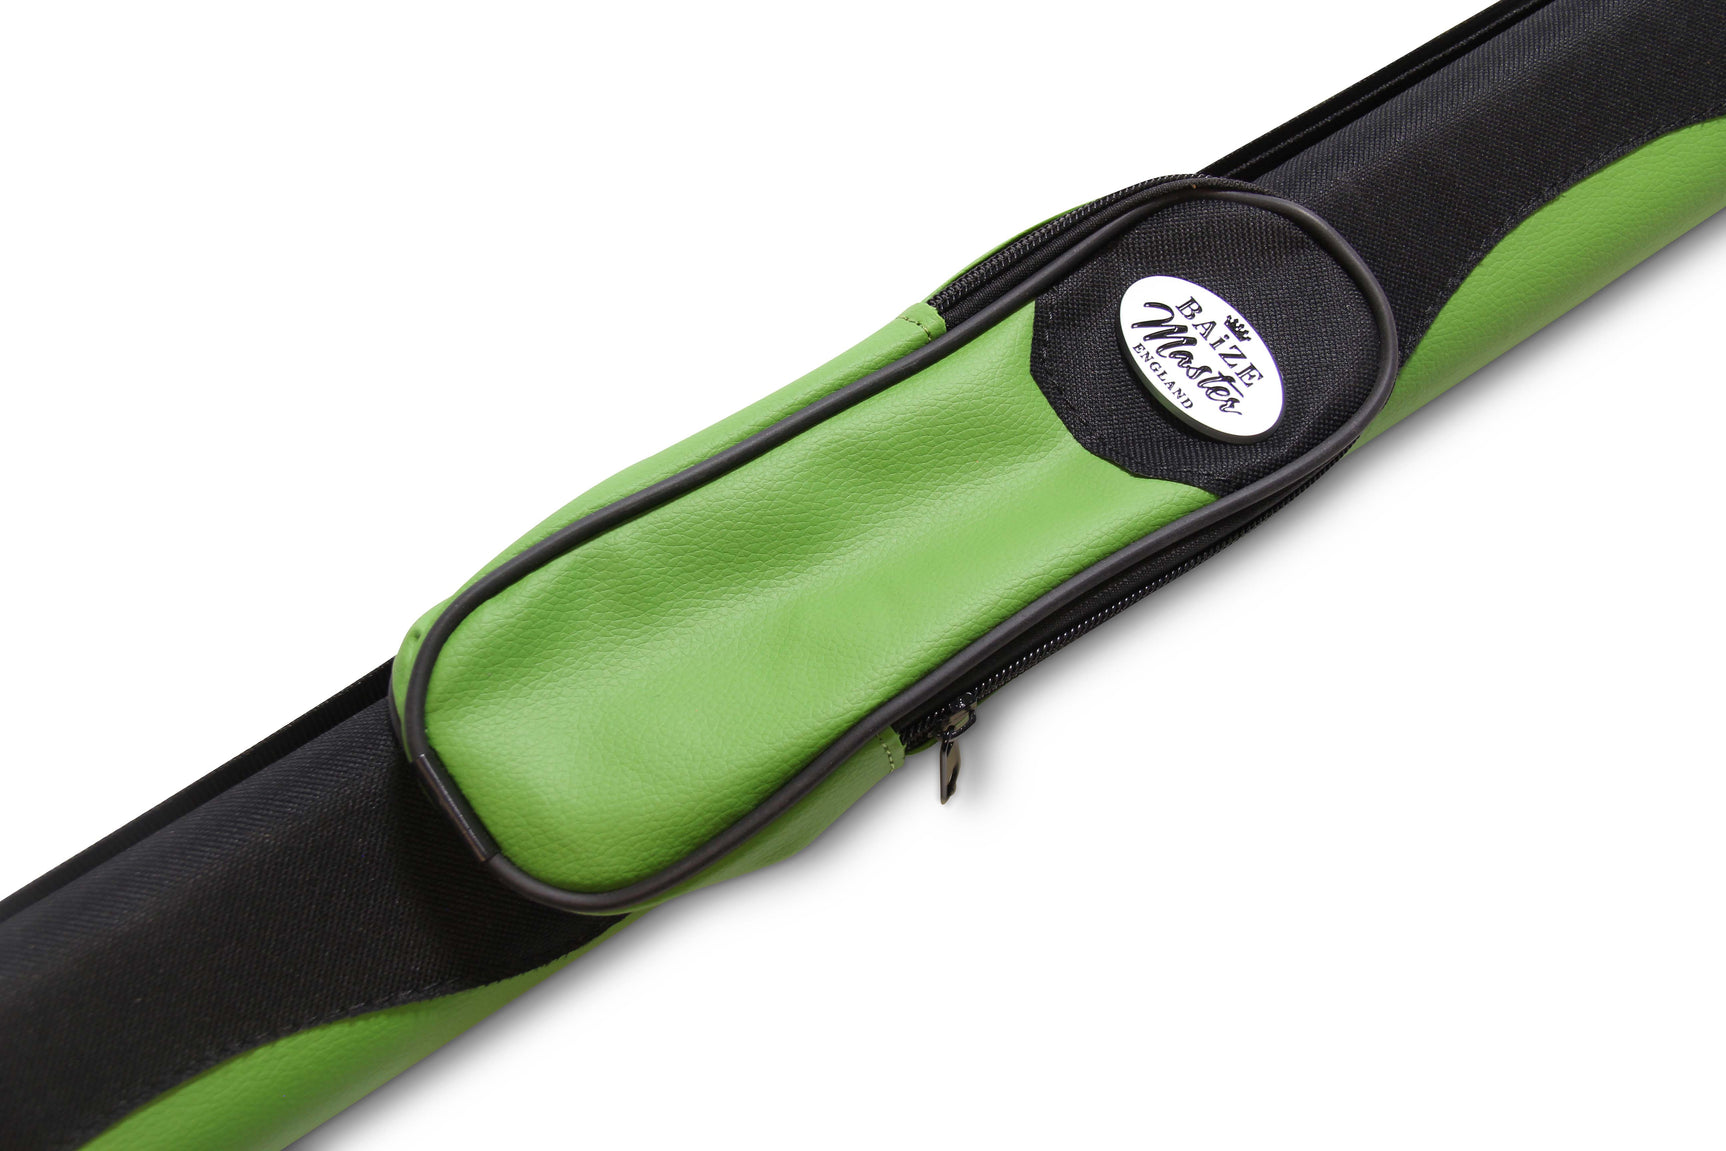 Baize Master Tri-Tube Snooker Pool Cue Case - Holds One 2 Piece Cue